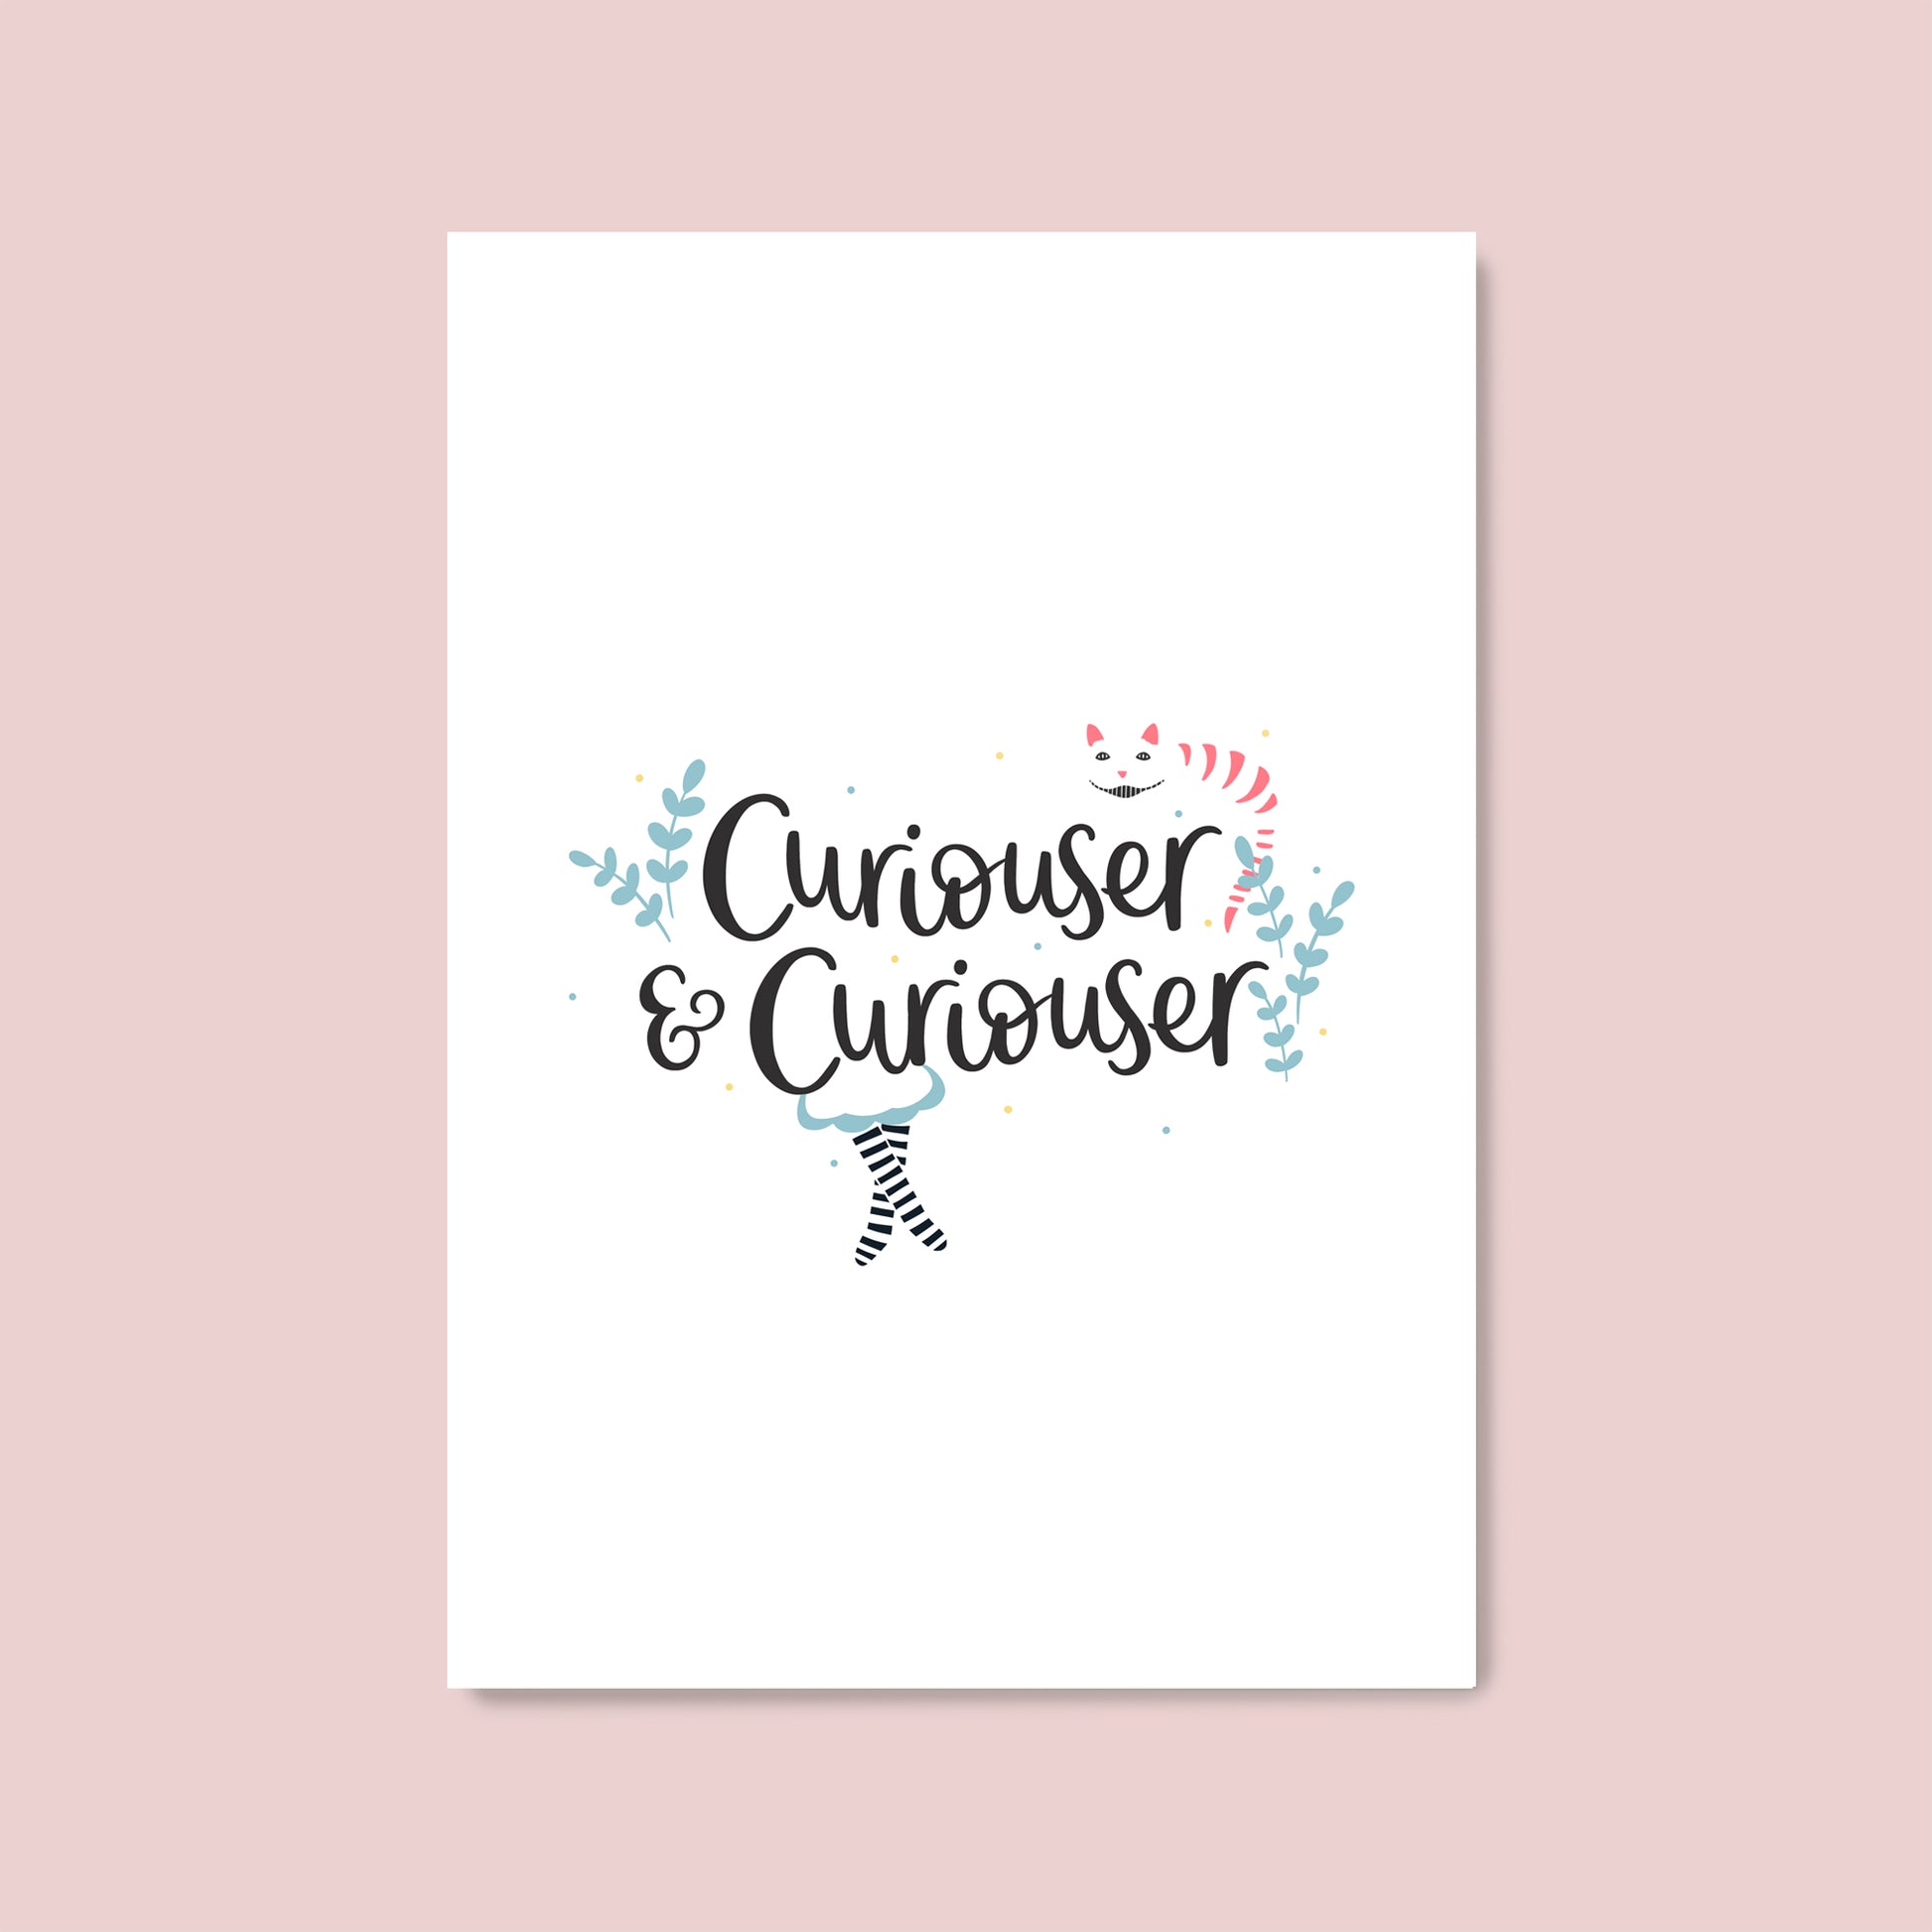 Curiouser and curiouser alice in wonderland children's print by Abbie Imagine